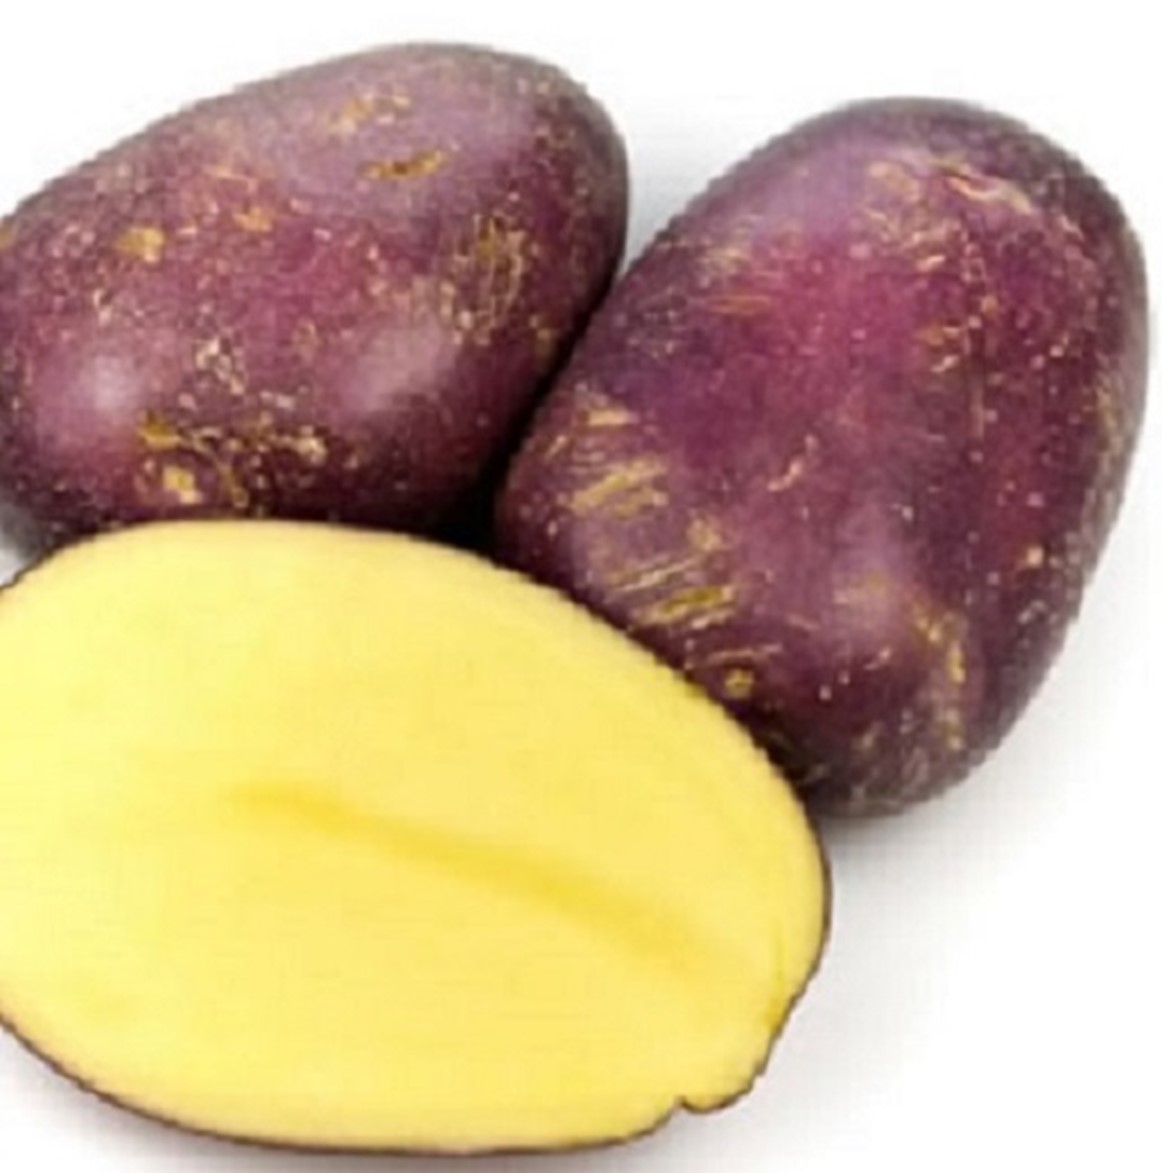 Heritage Old Traditional Red Pontiac Seed Potatoes